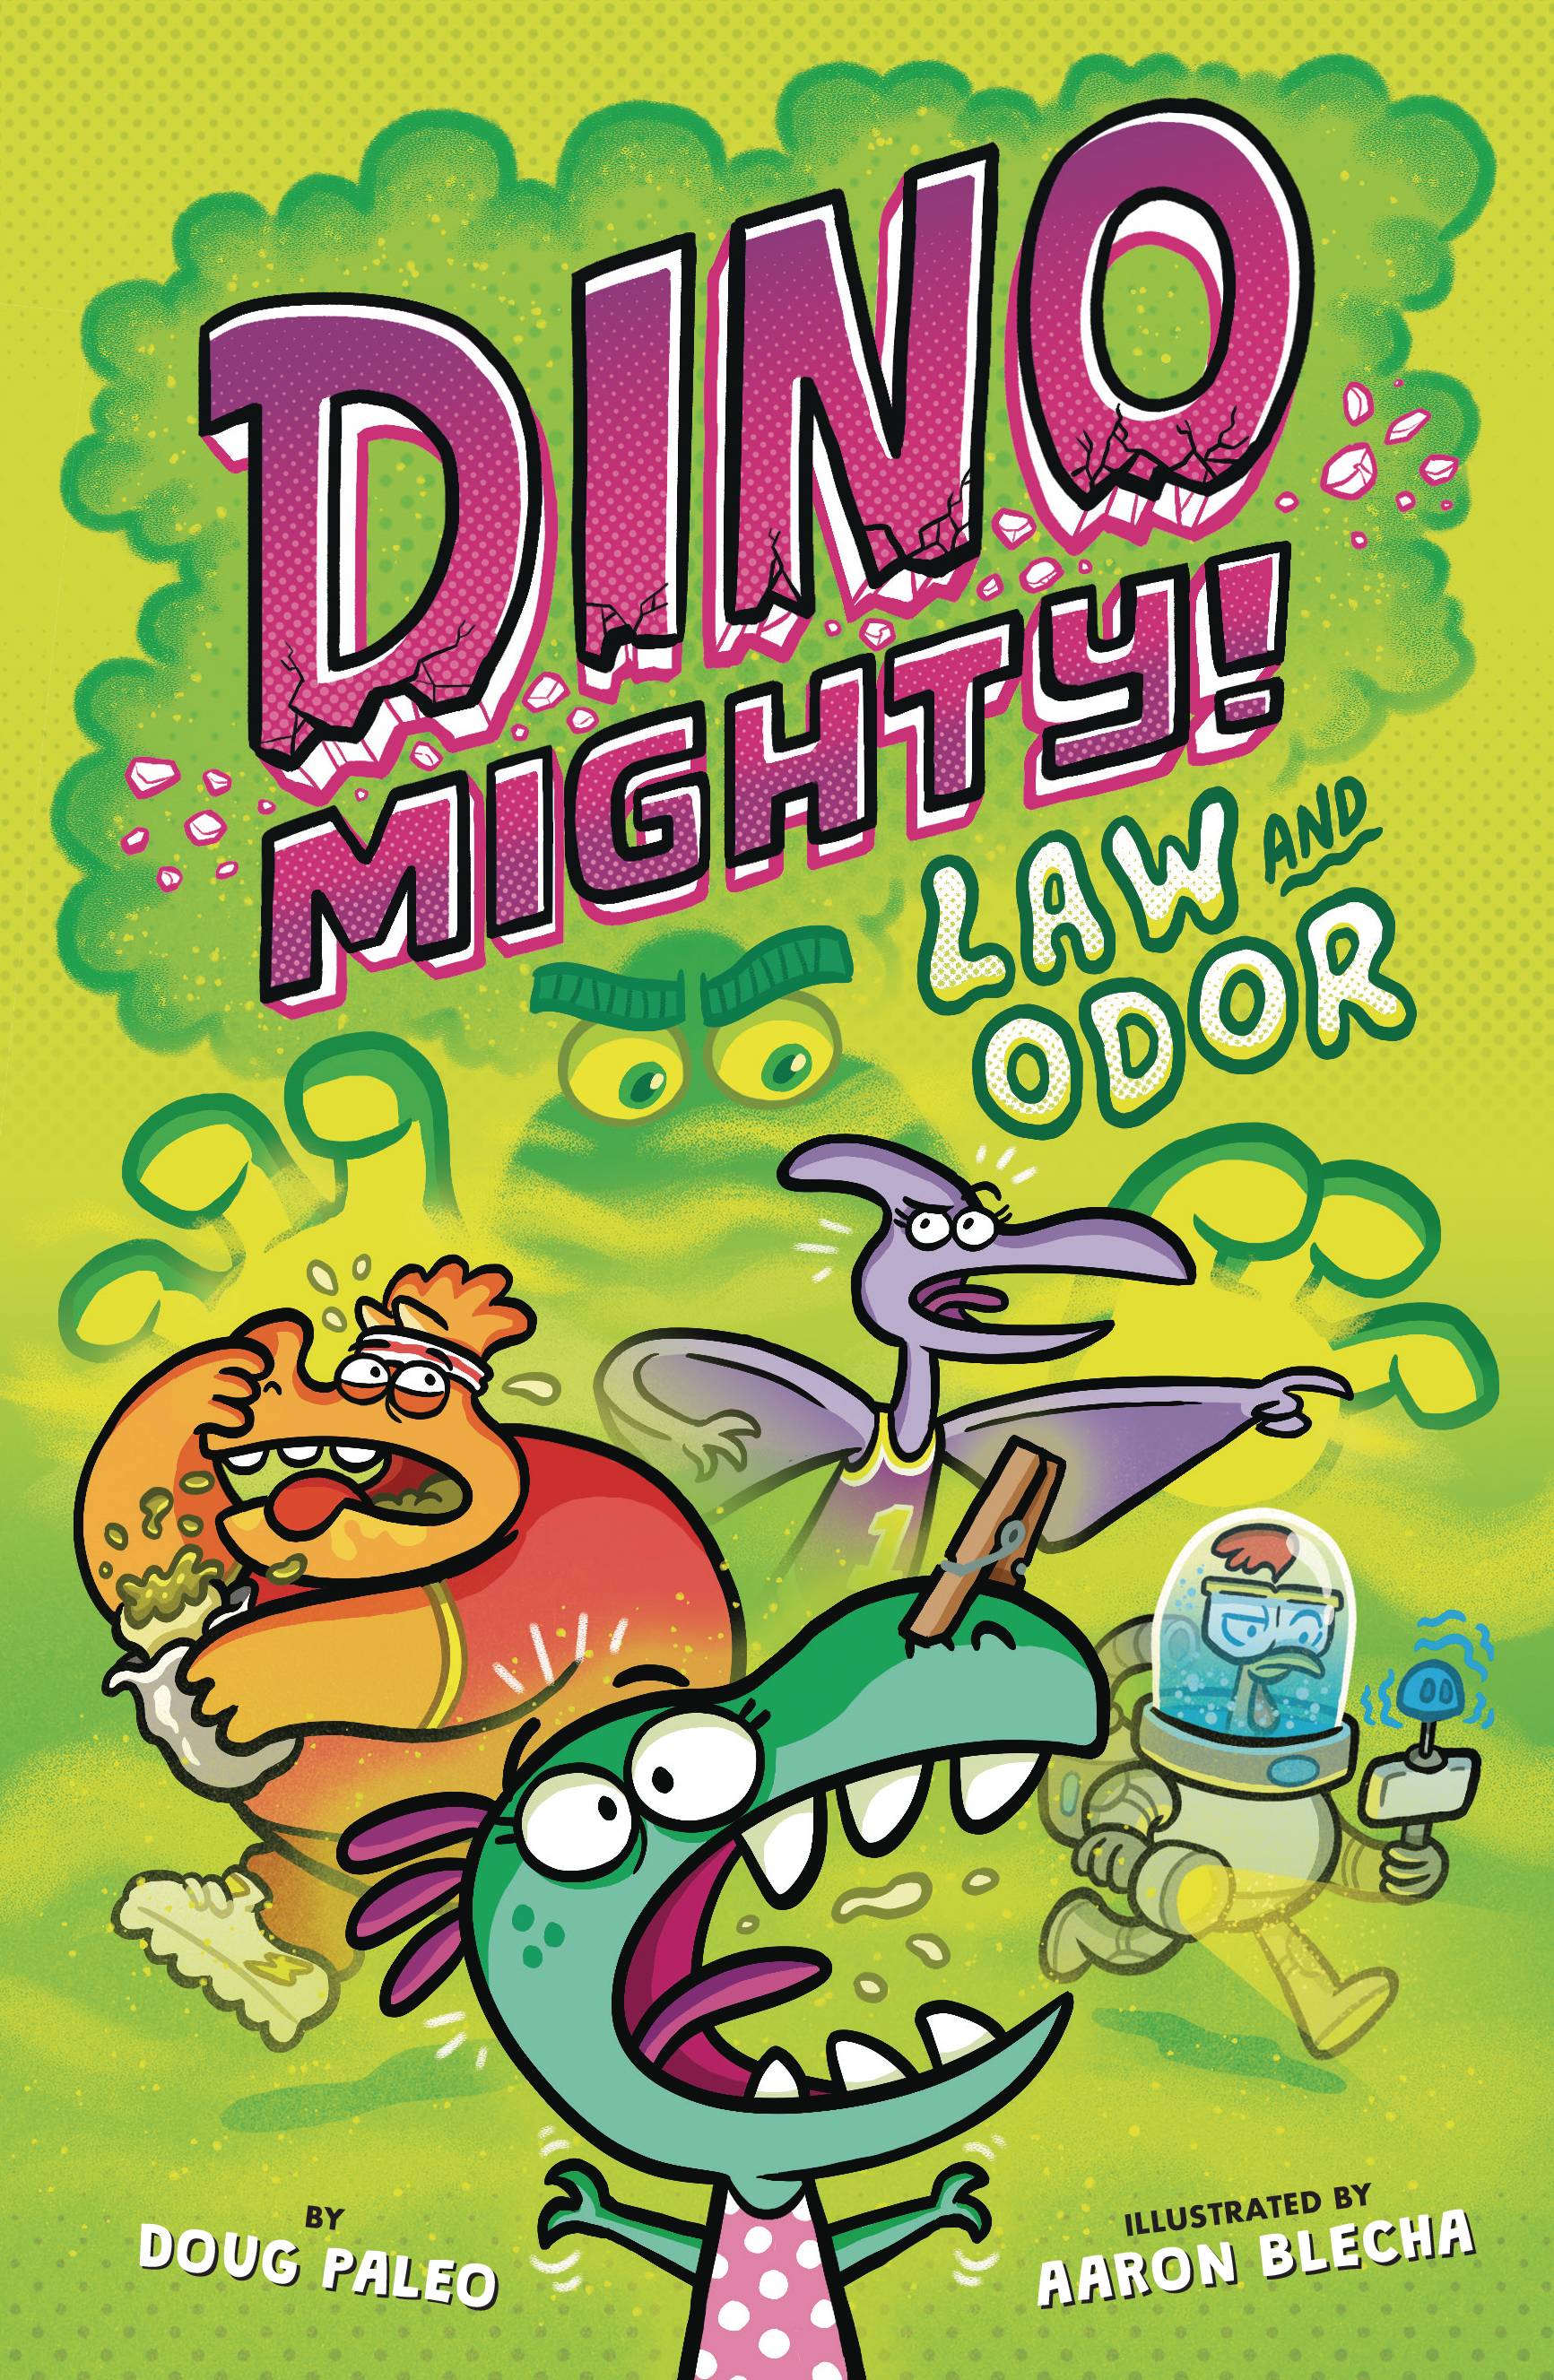 DINO MIGHTY TP 02 LAW AND ODOR